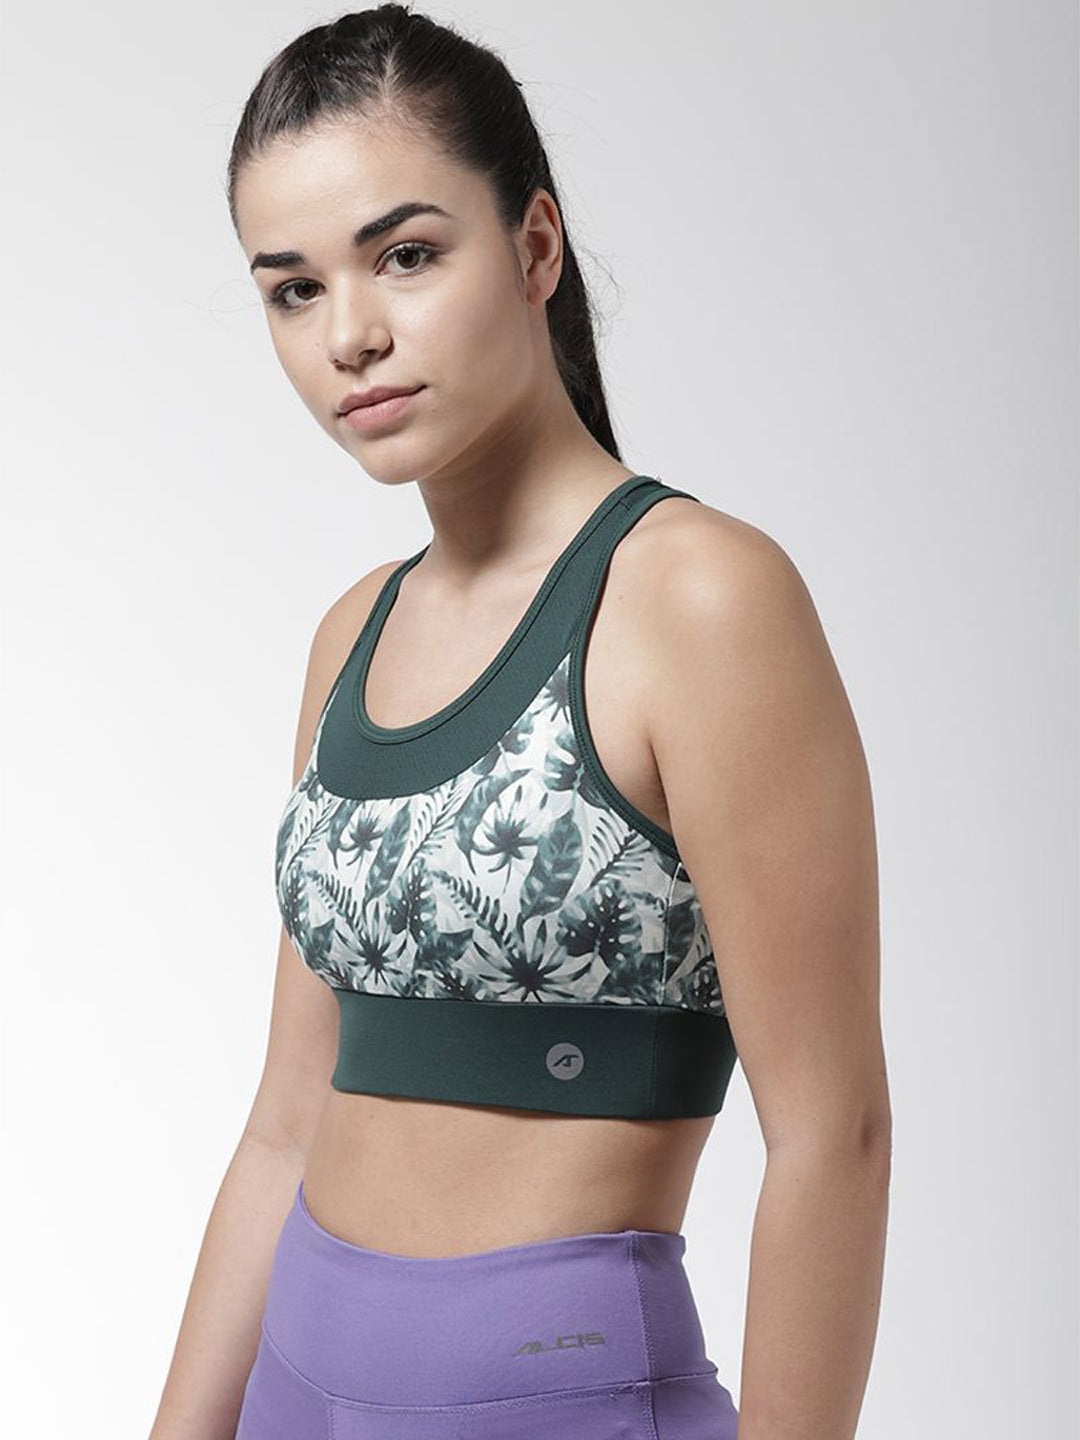 Alcis Green & White Printed Non-Wired Non Padded Sports Bra